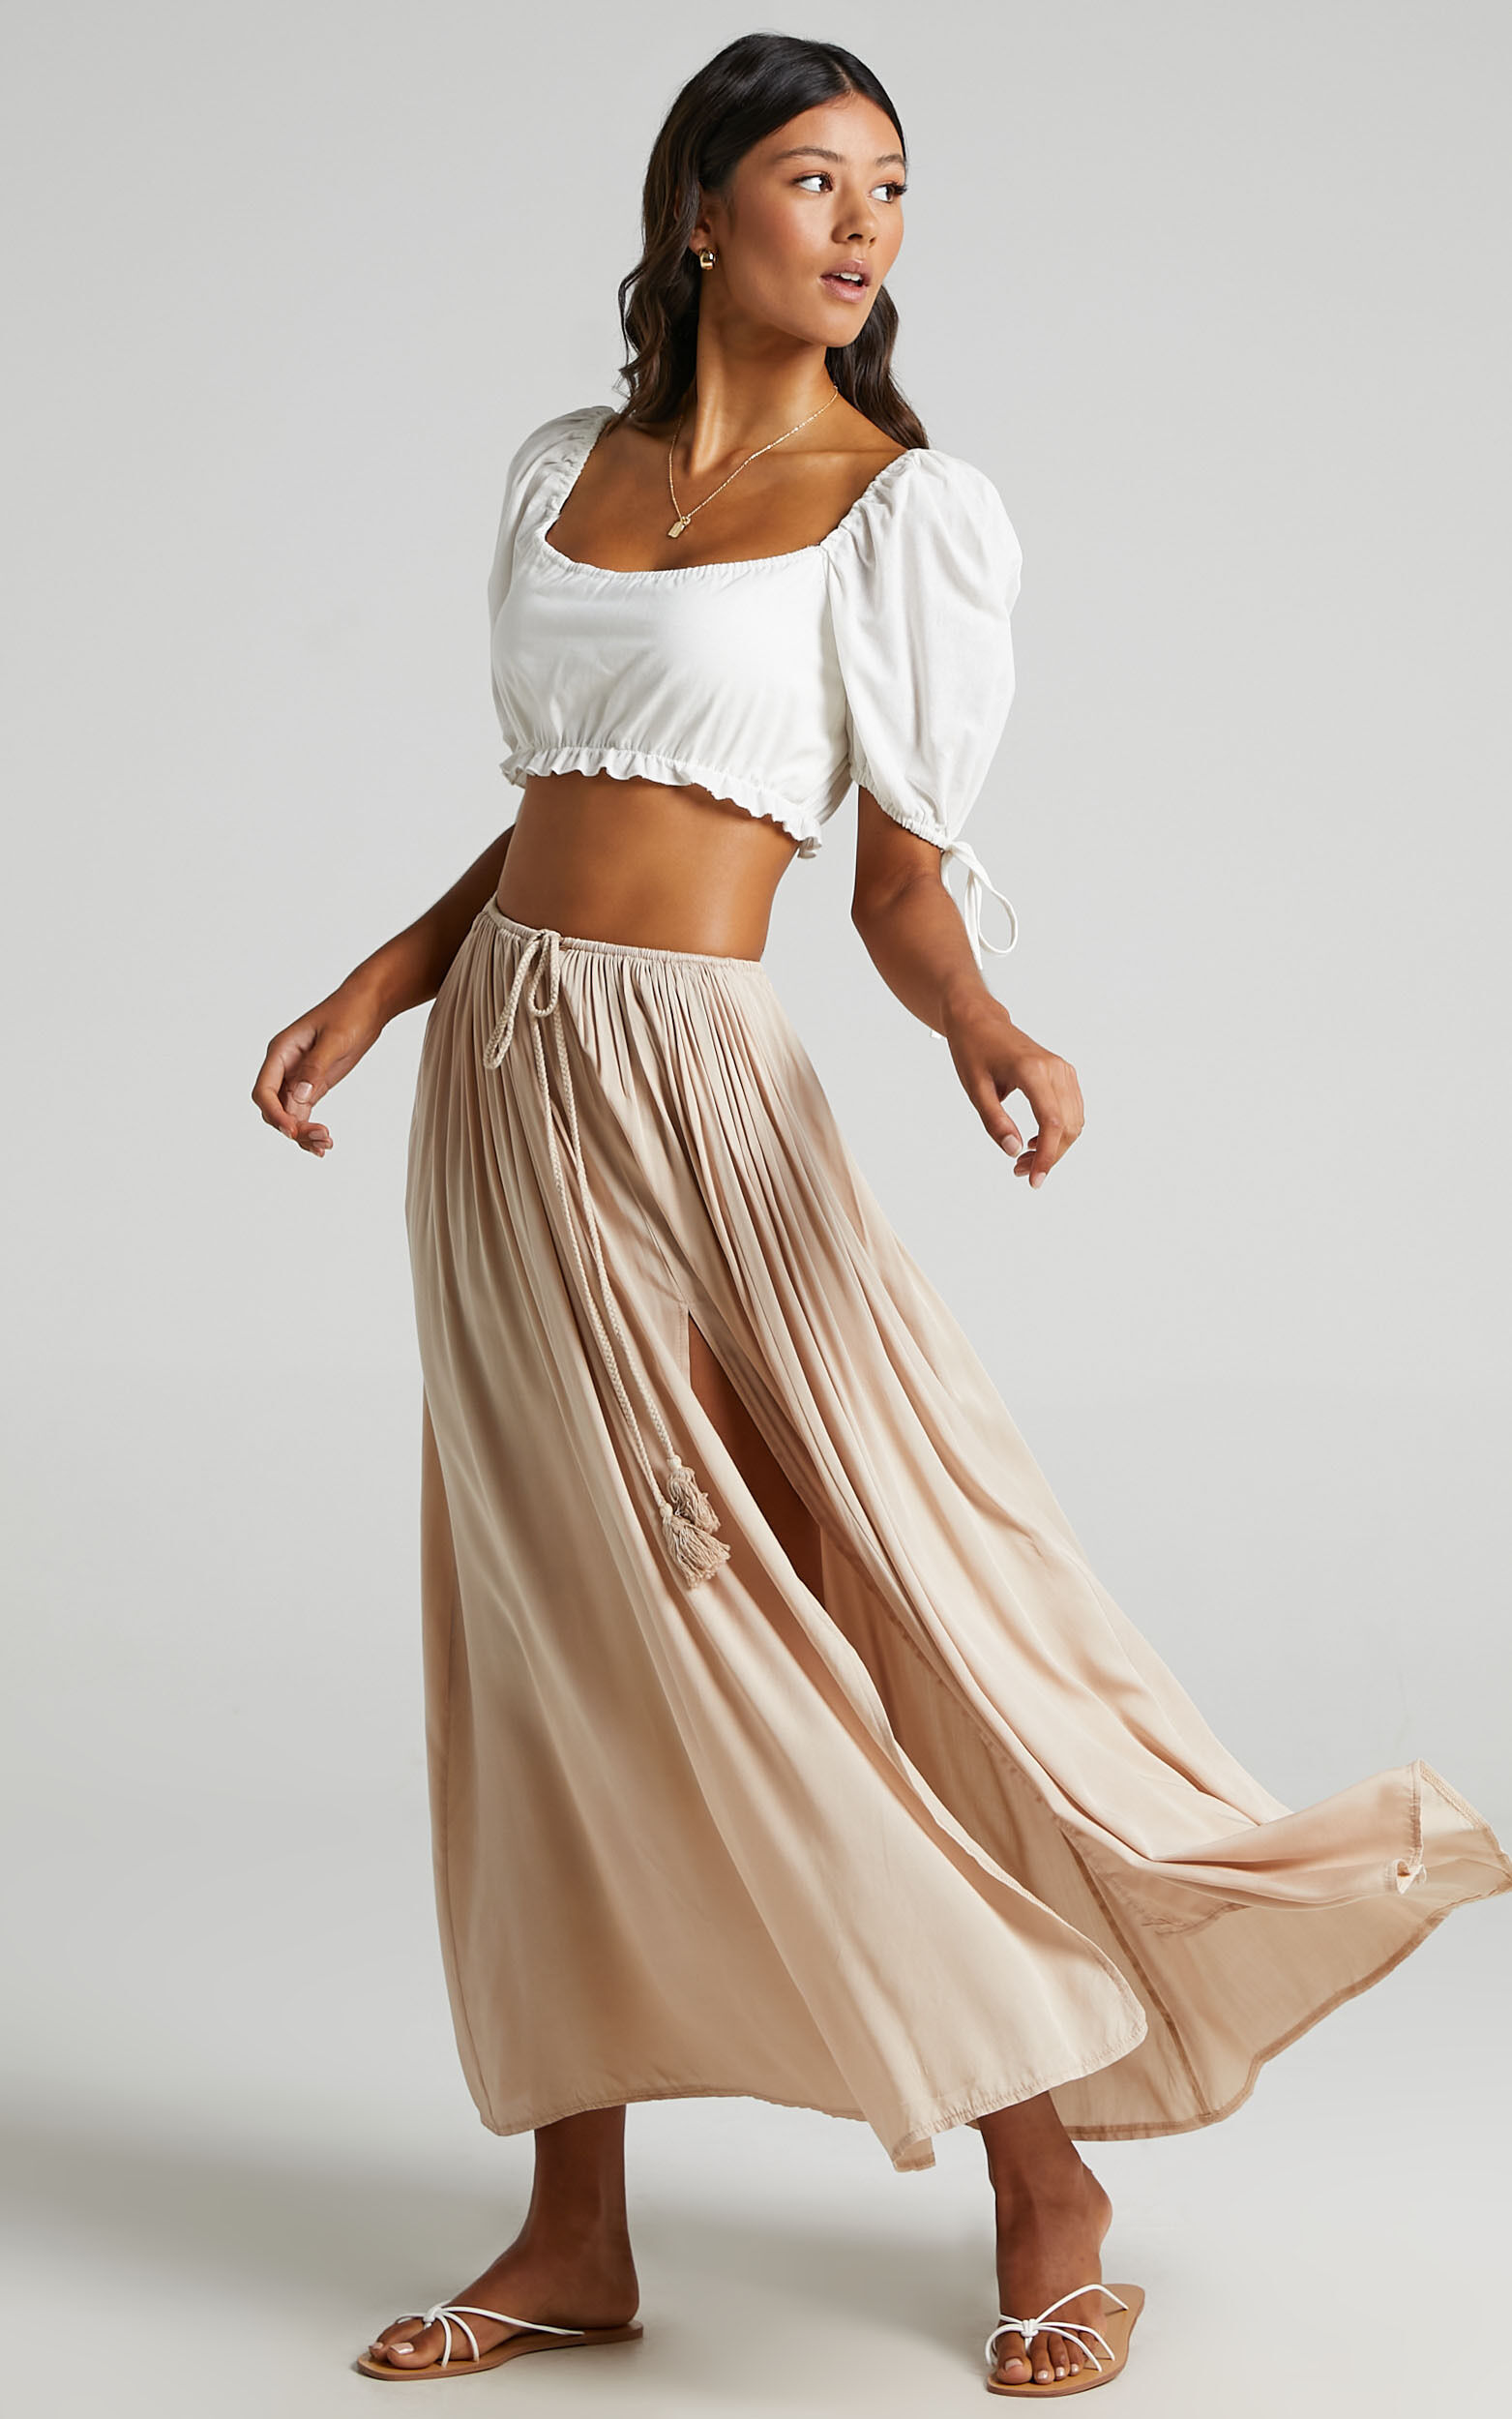 Natural Peserico Satin Long Skirt in Beige Womens Clothing Skirts Maxi skirts 